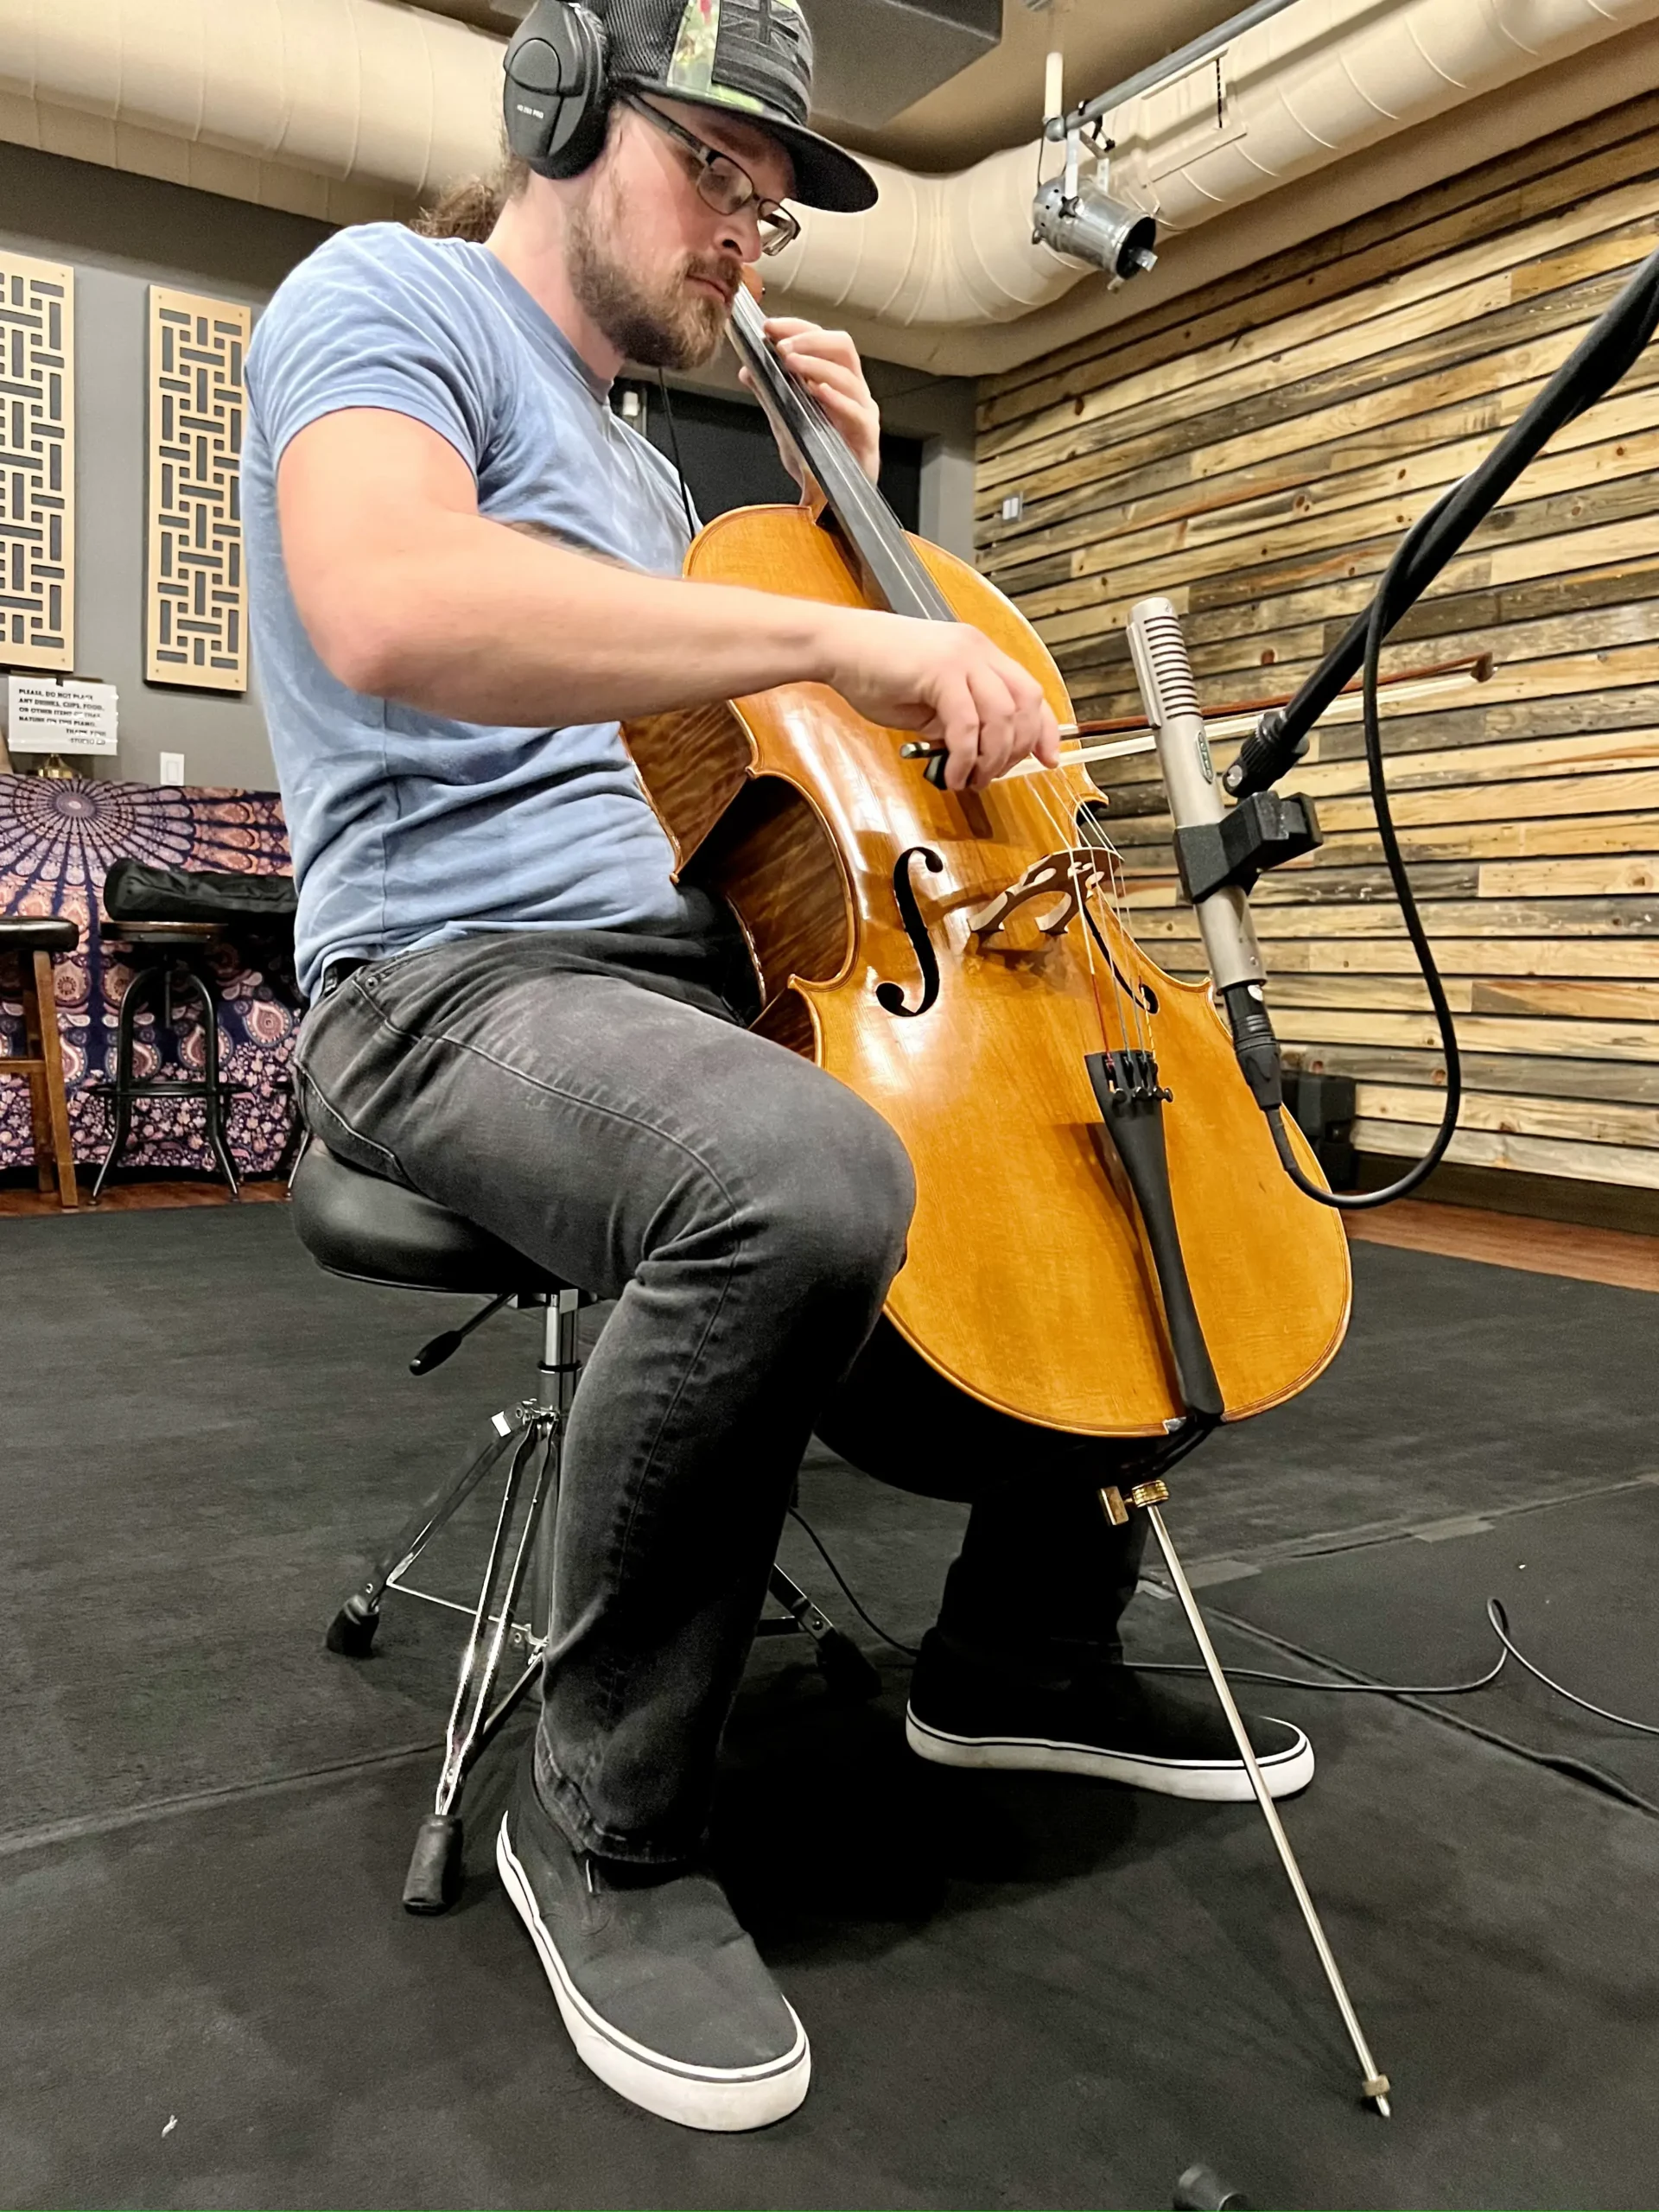 A man in a studio wearing headphones plays a cello, positioned in front of a microphone, with a focused expression.